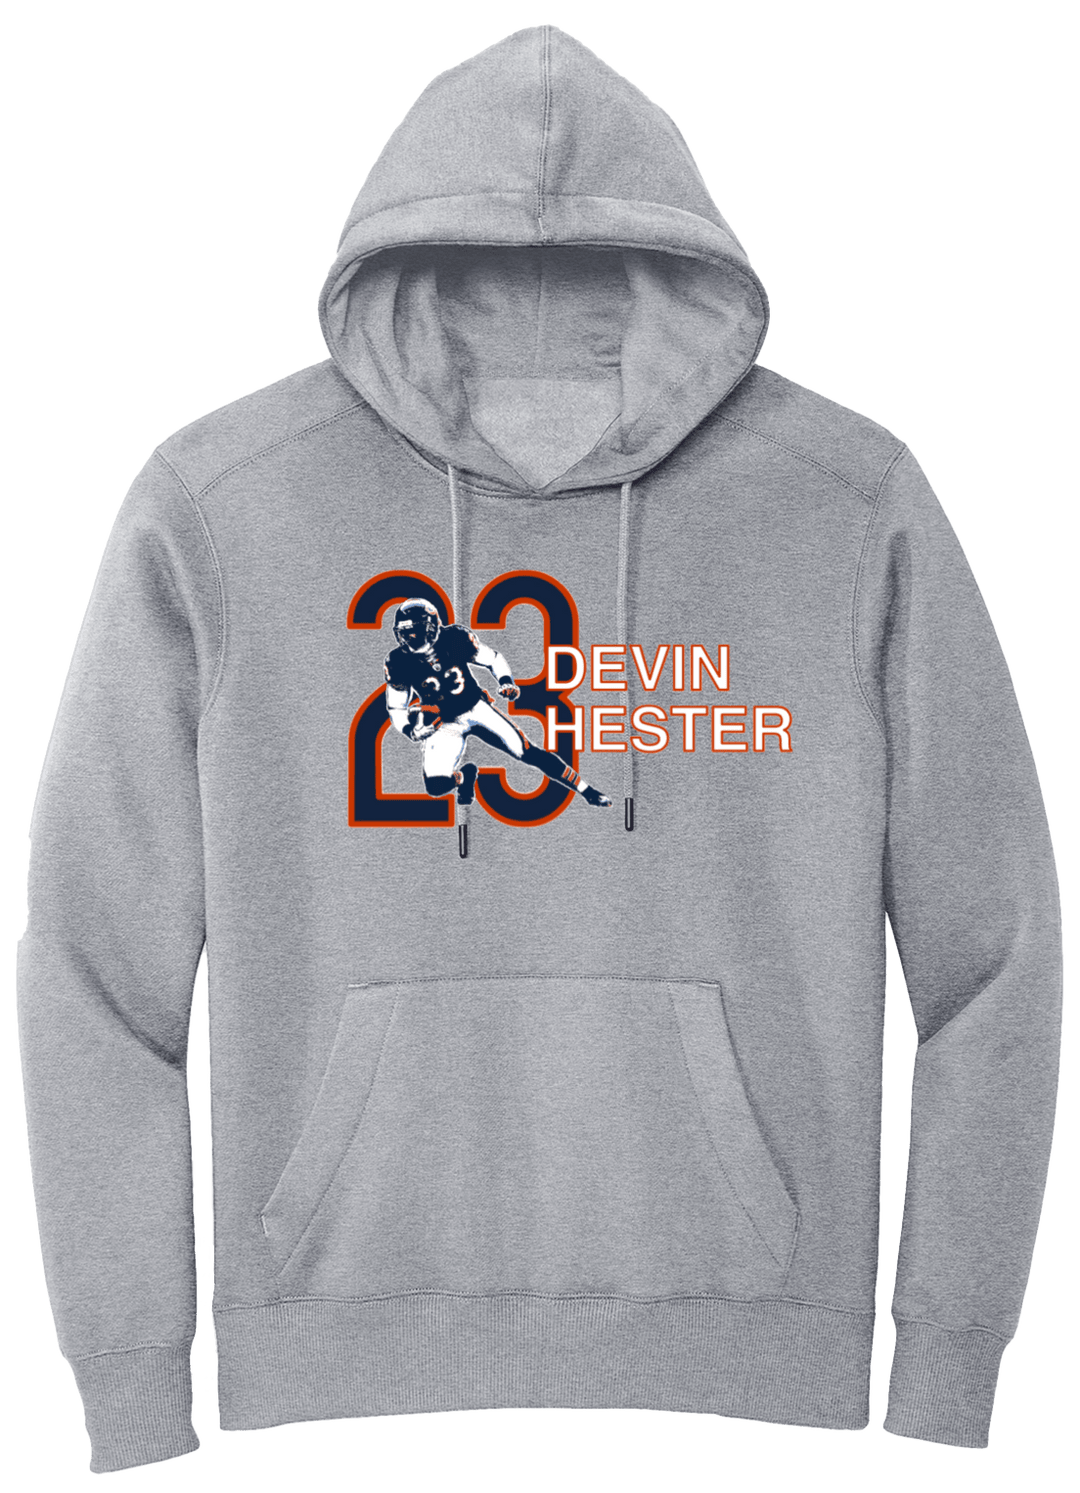 DEVIN HESTER GRAPHIC (HOODED SWEATSHIRT) - OBVIOUS SHIRTS